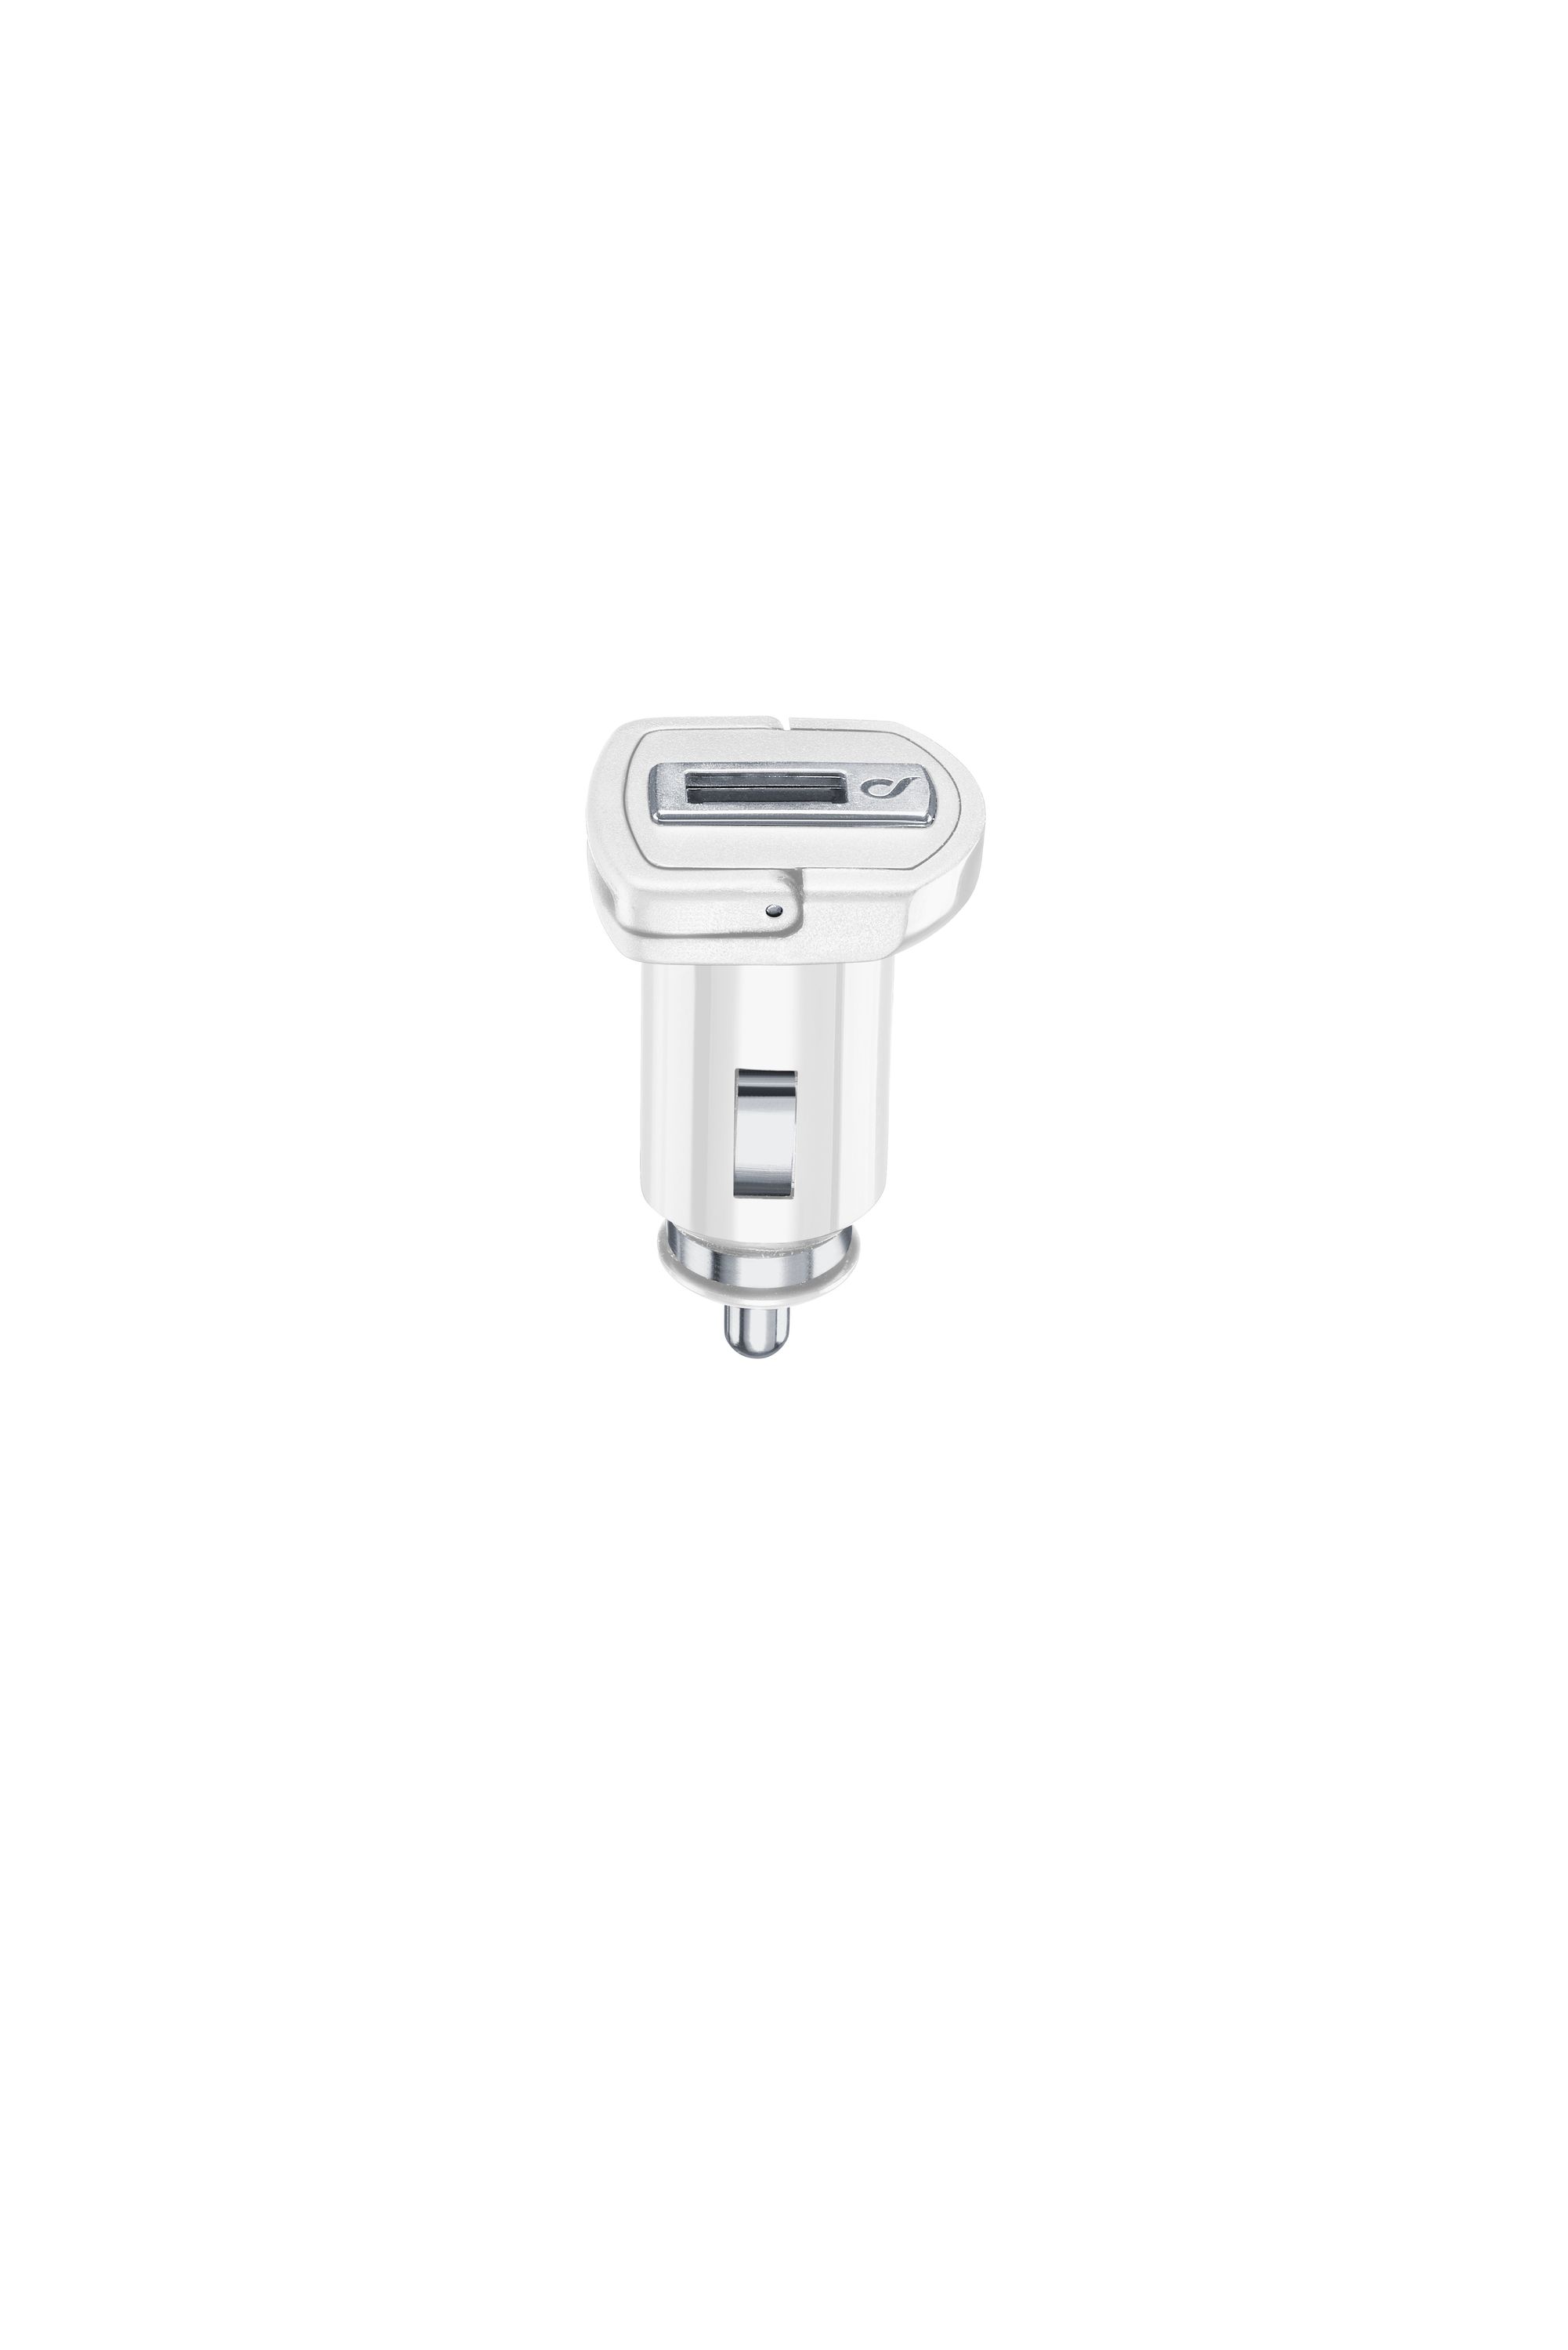 USB Car Charger 10W - Samsung, Car Battery Chargers, Charge and utility